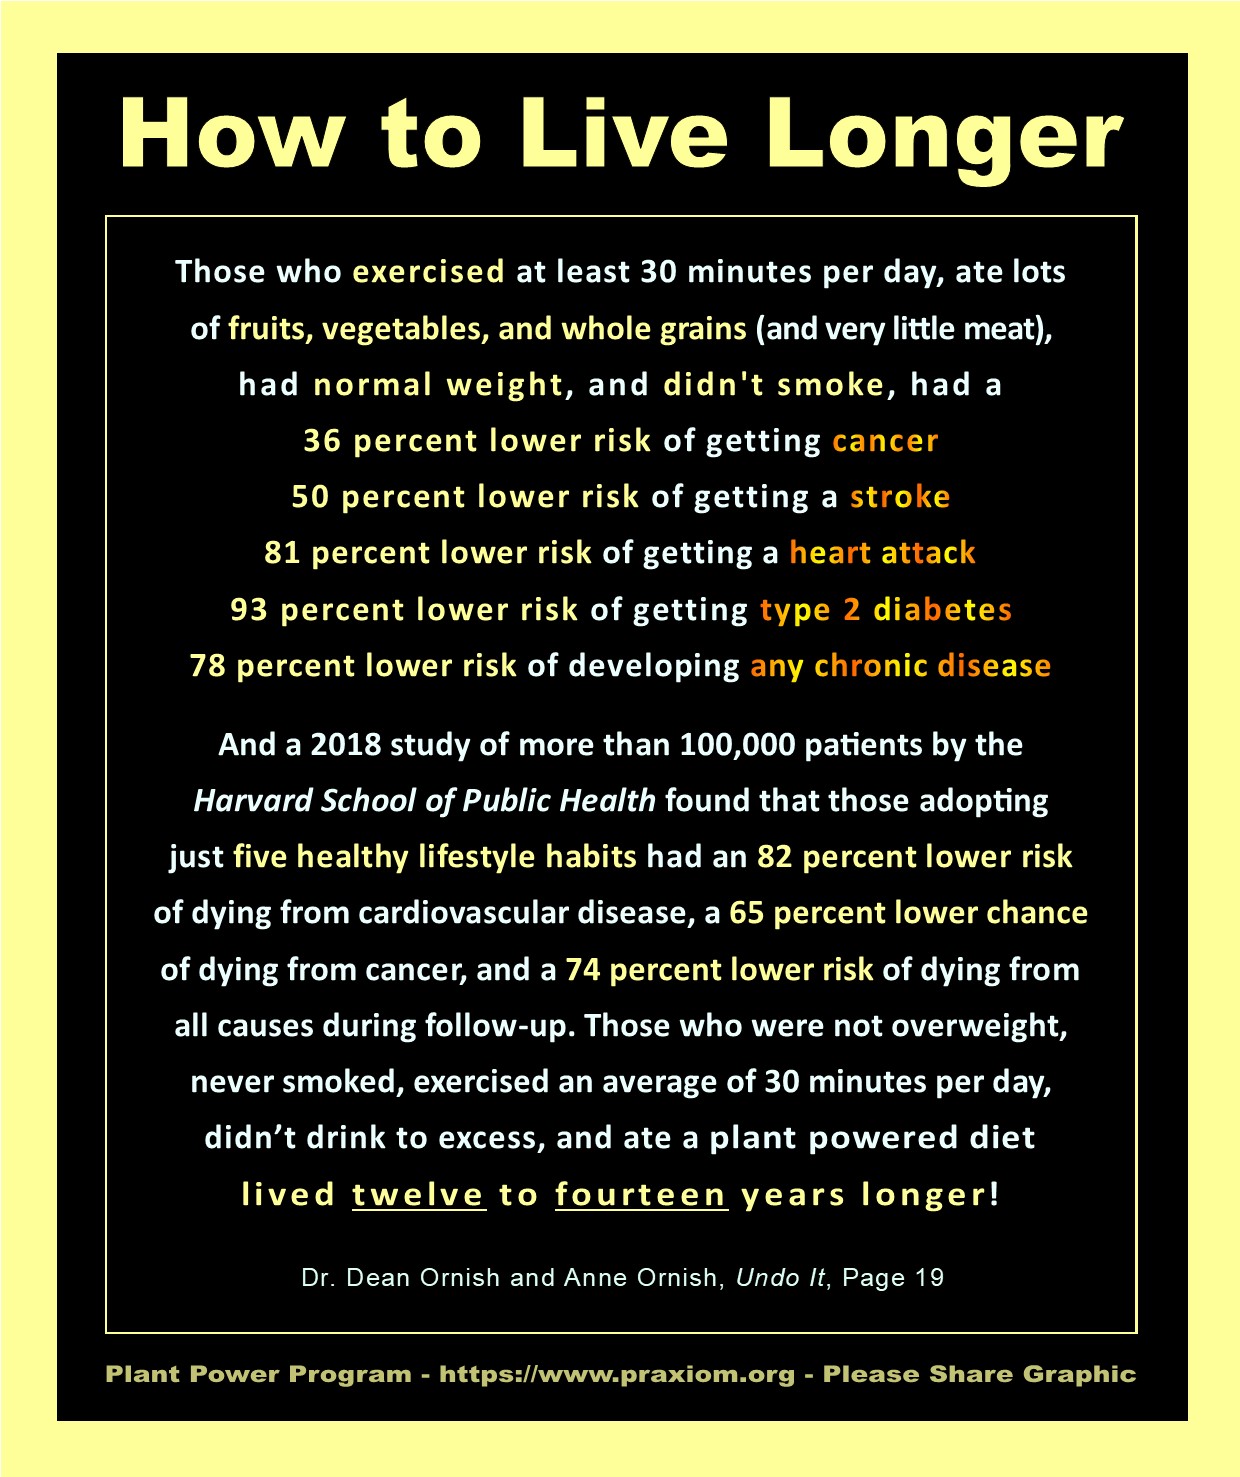 How to Live Longer - Dr. Dean Ornish